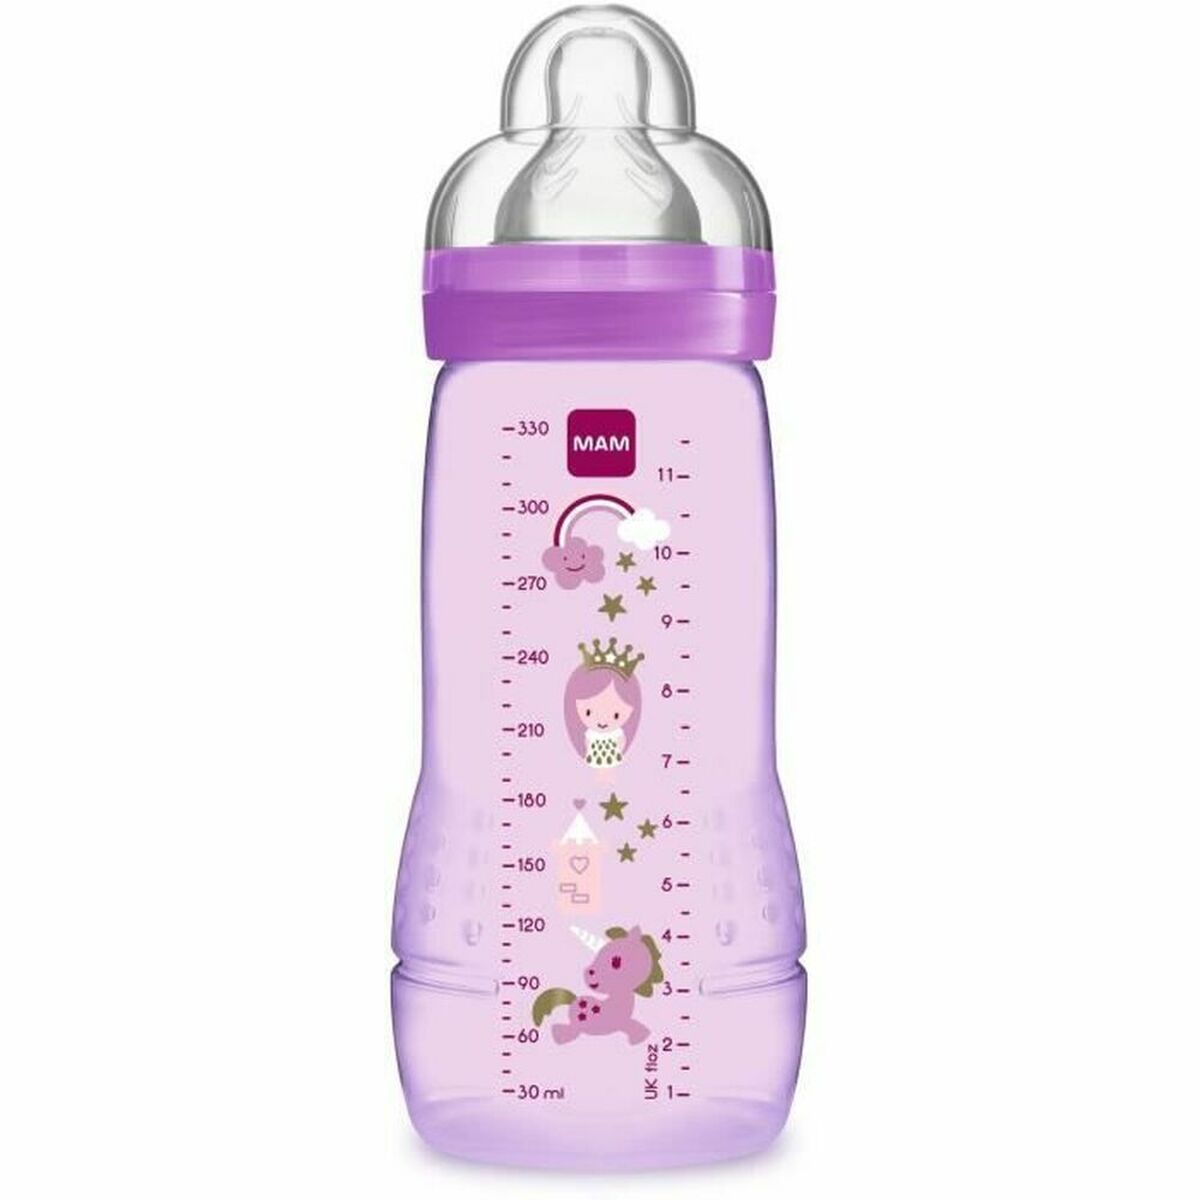 Anti-colic Bottle MAM Easy Active Pink (Refurbished A)